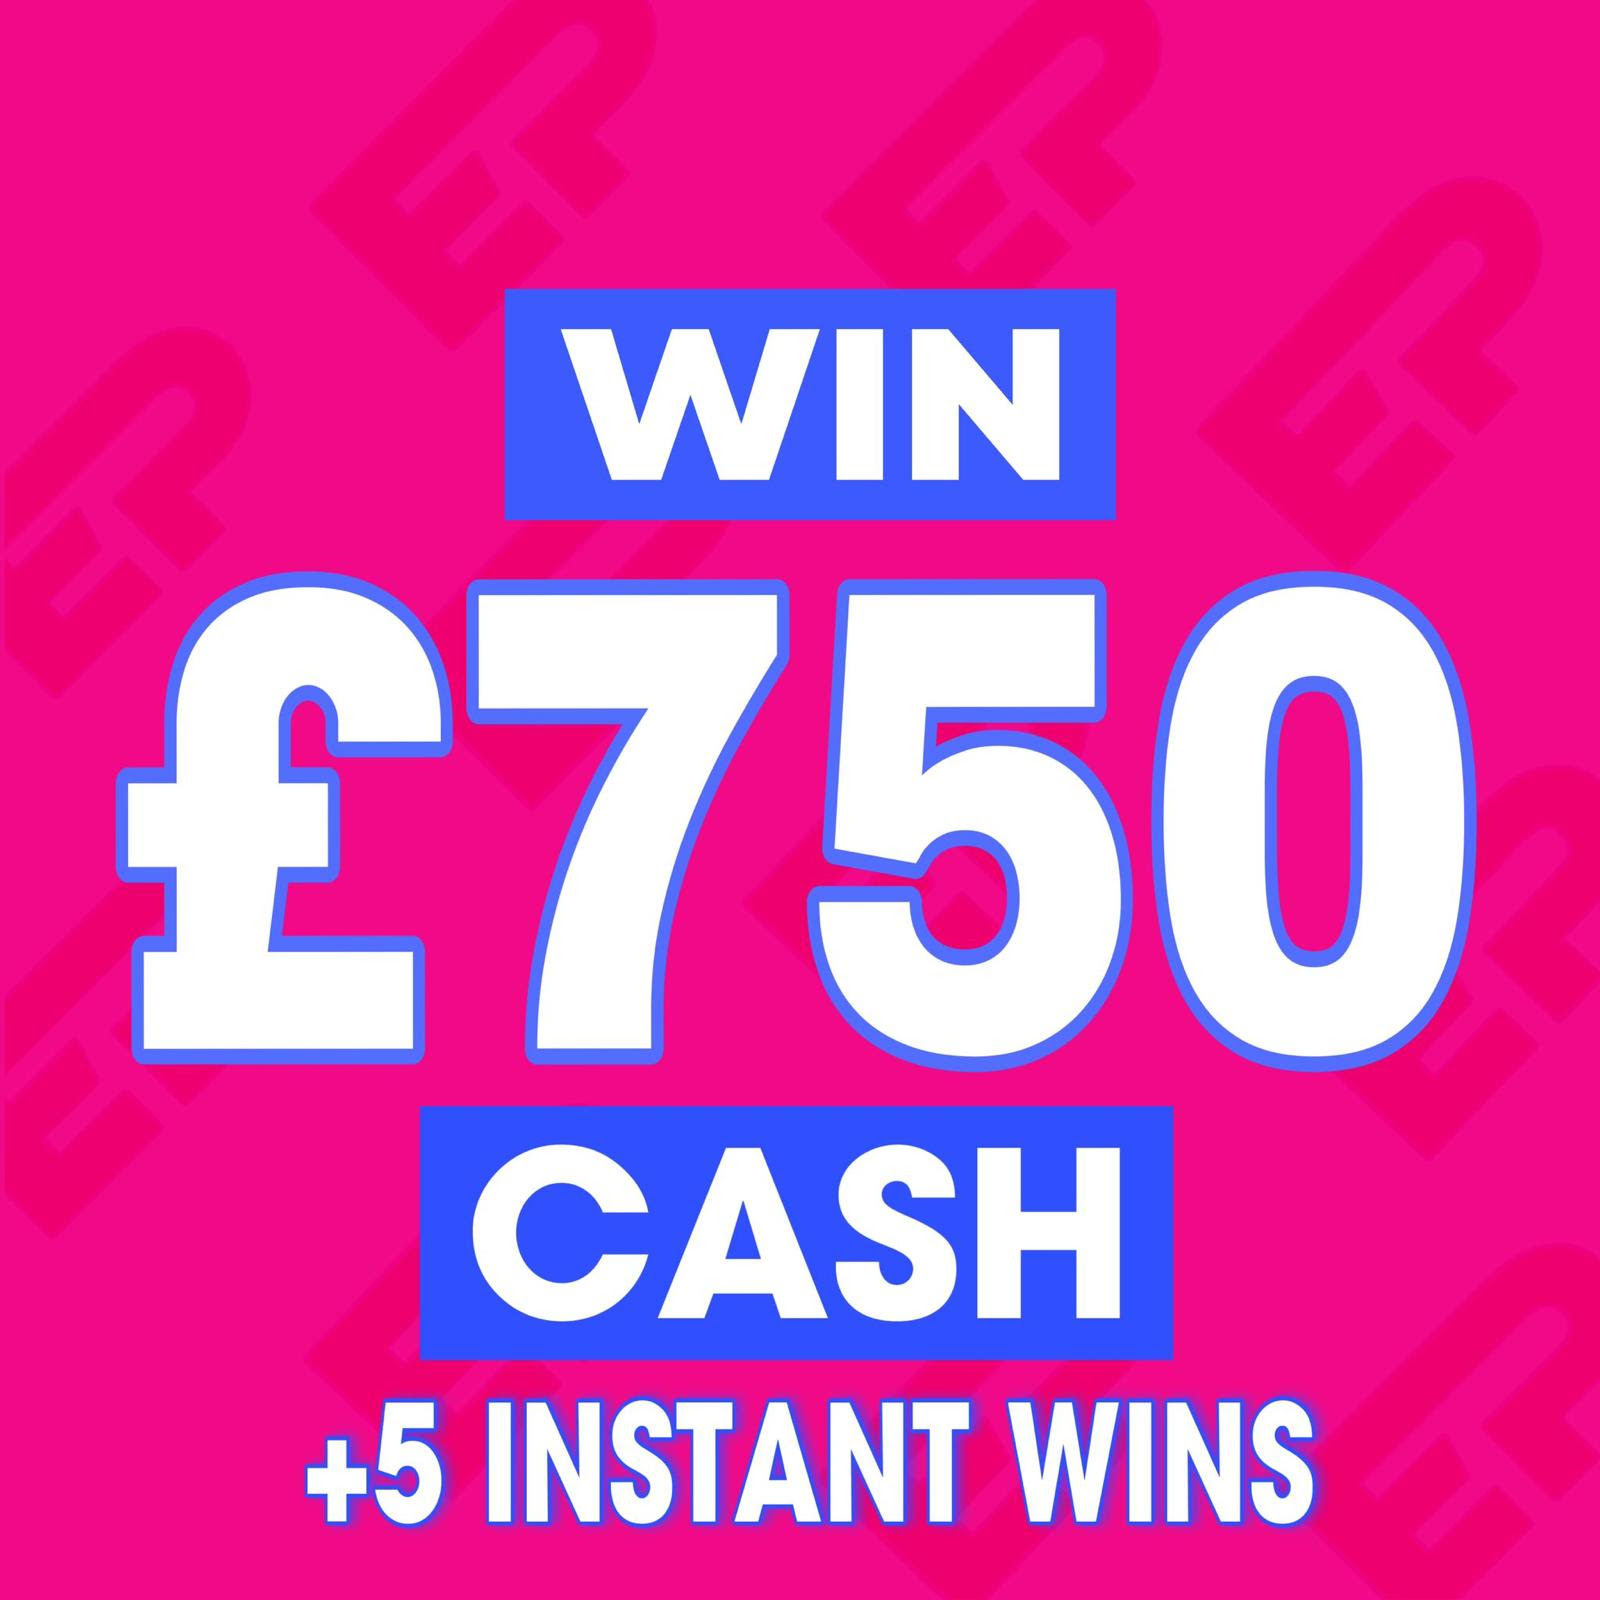 Image of WIN £750 CASH + 5 INSTANT WINS #3